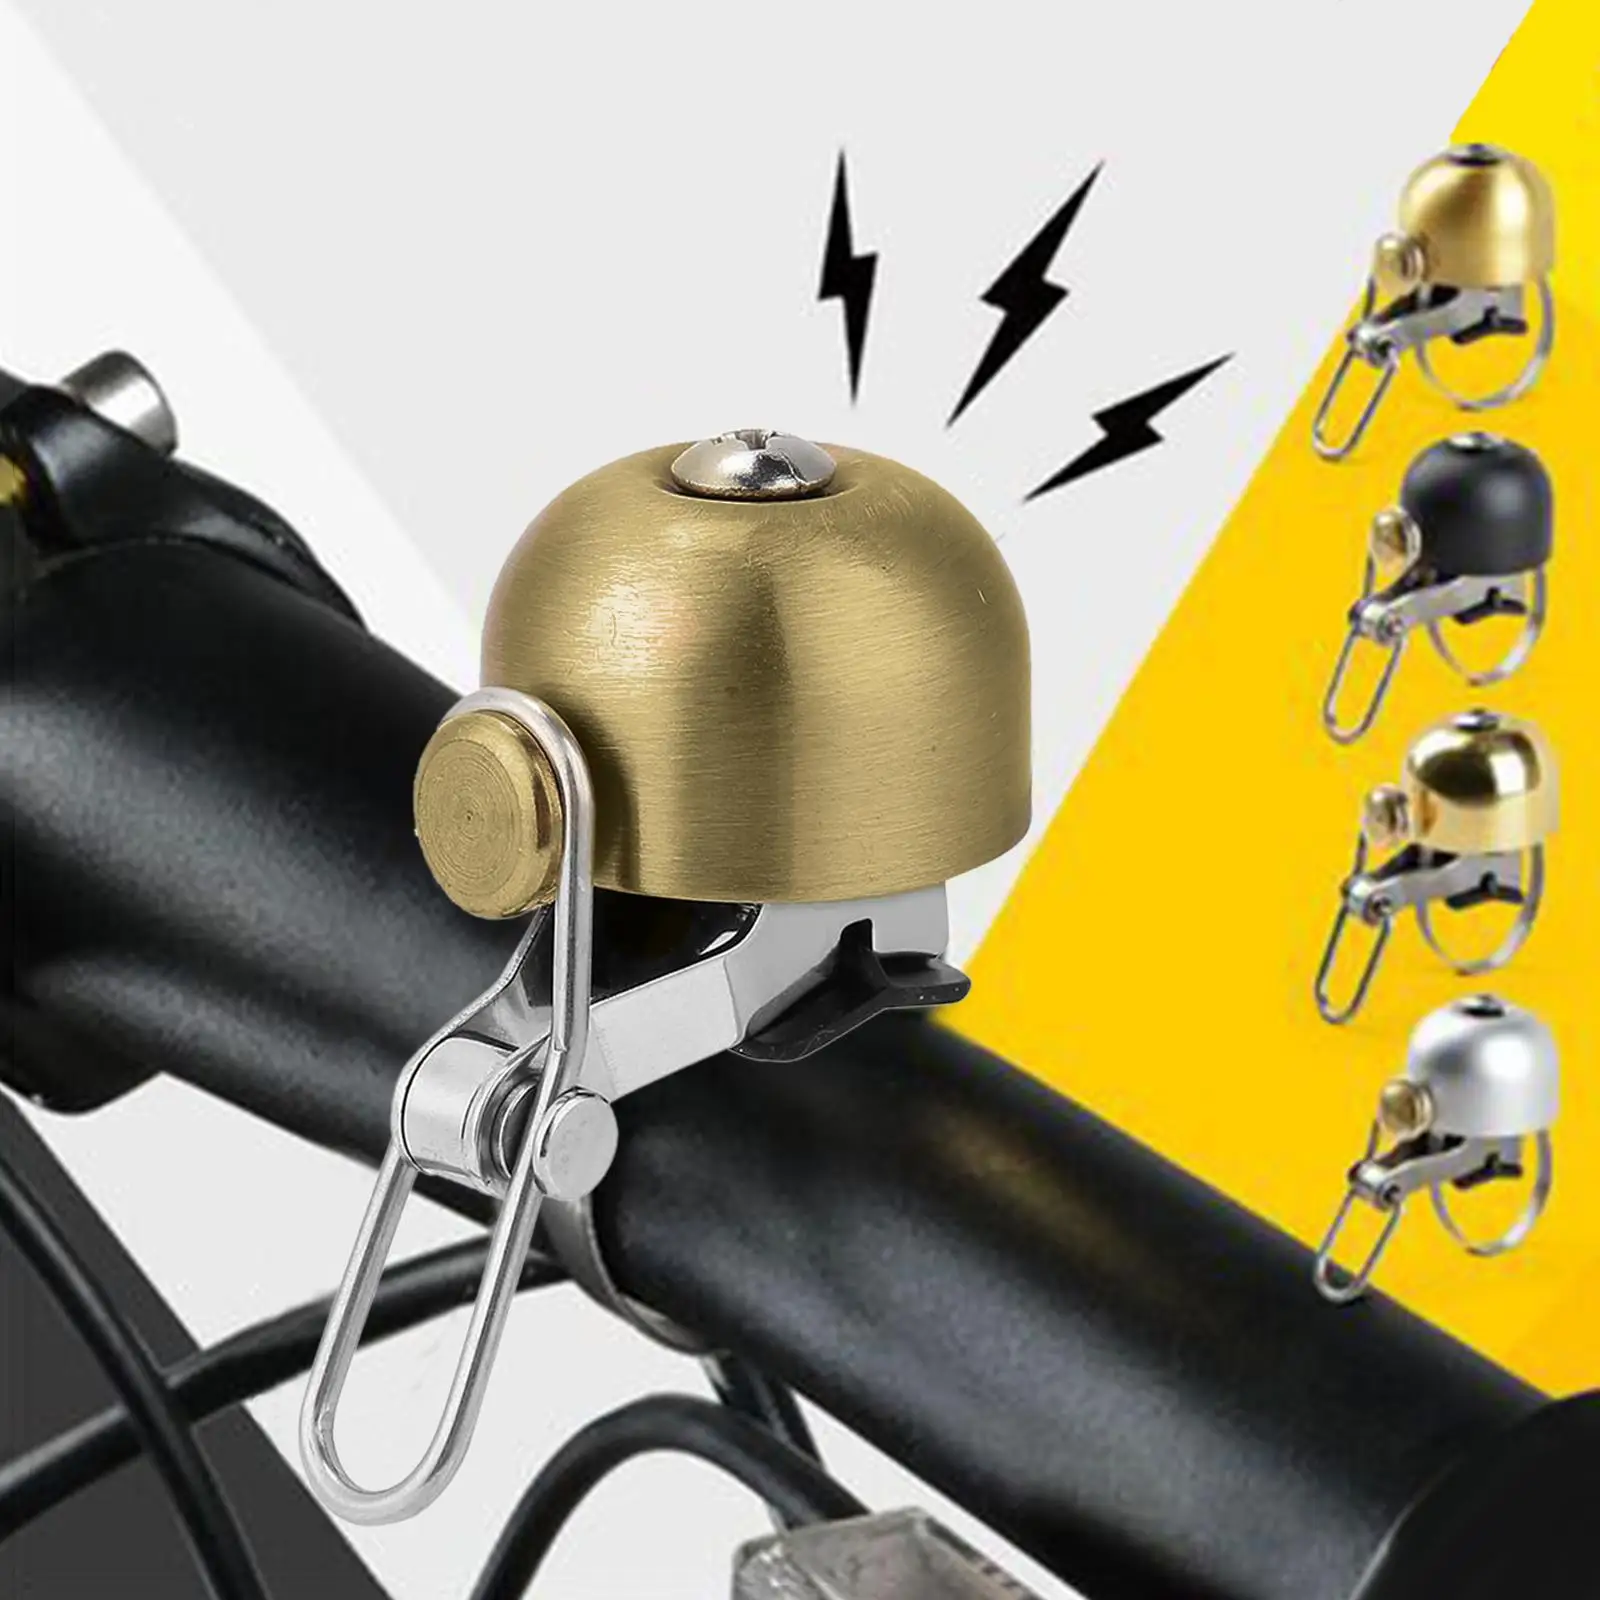  Bike Bells Adults Handlebars Mounted Clear Loud Riding Safety Bicycle Bell